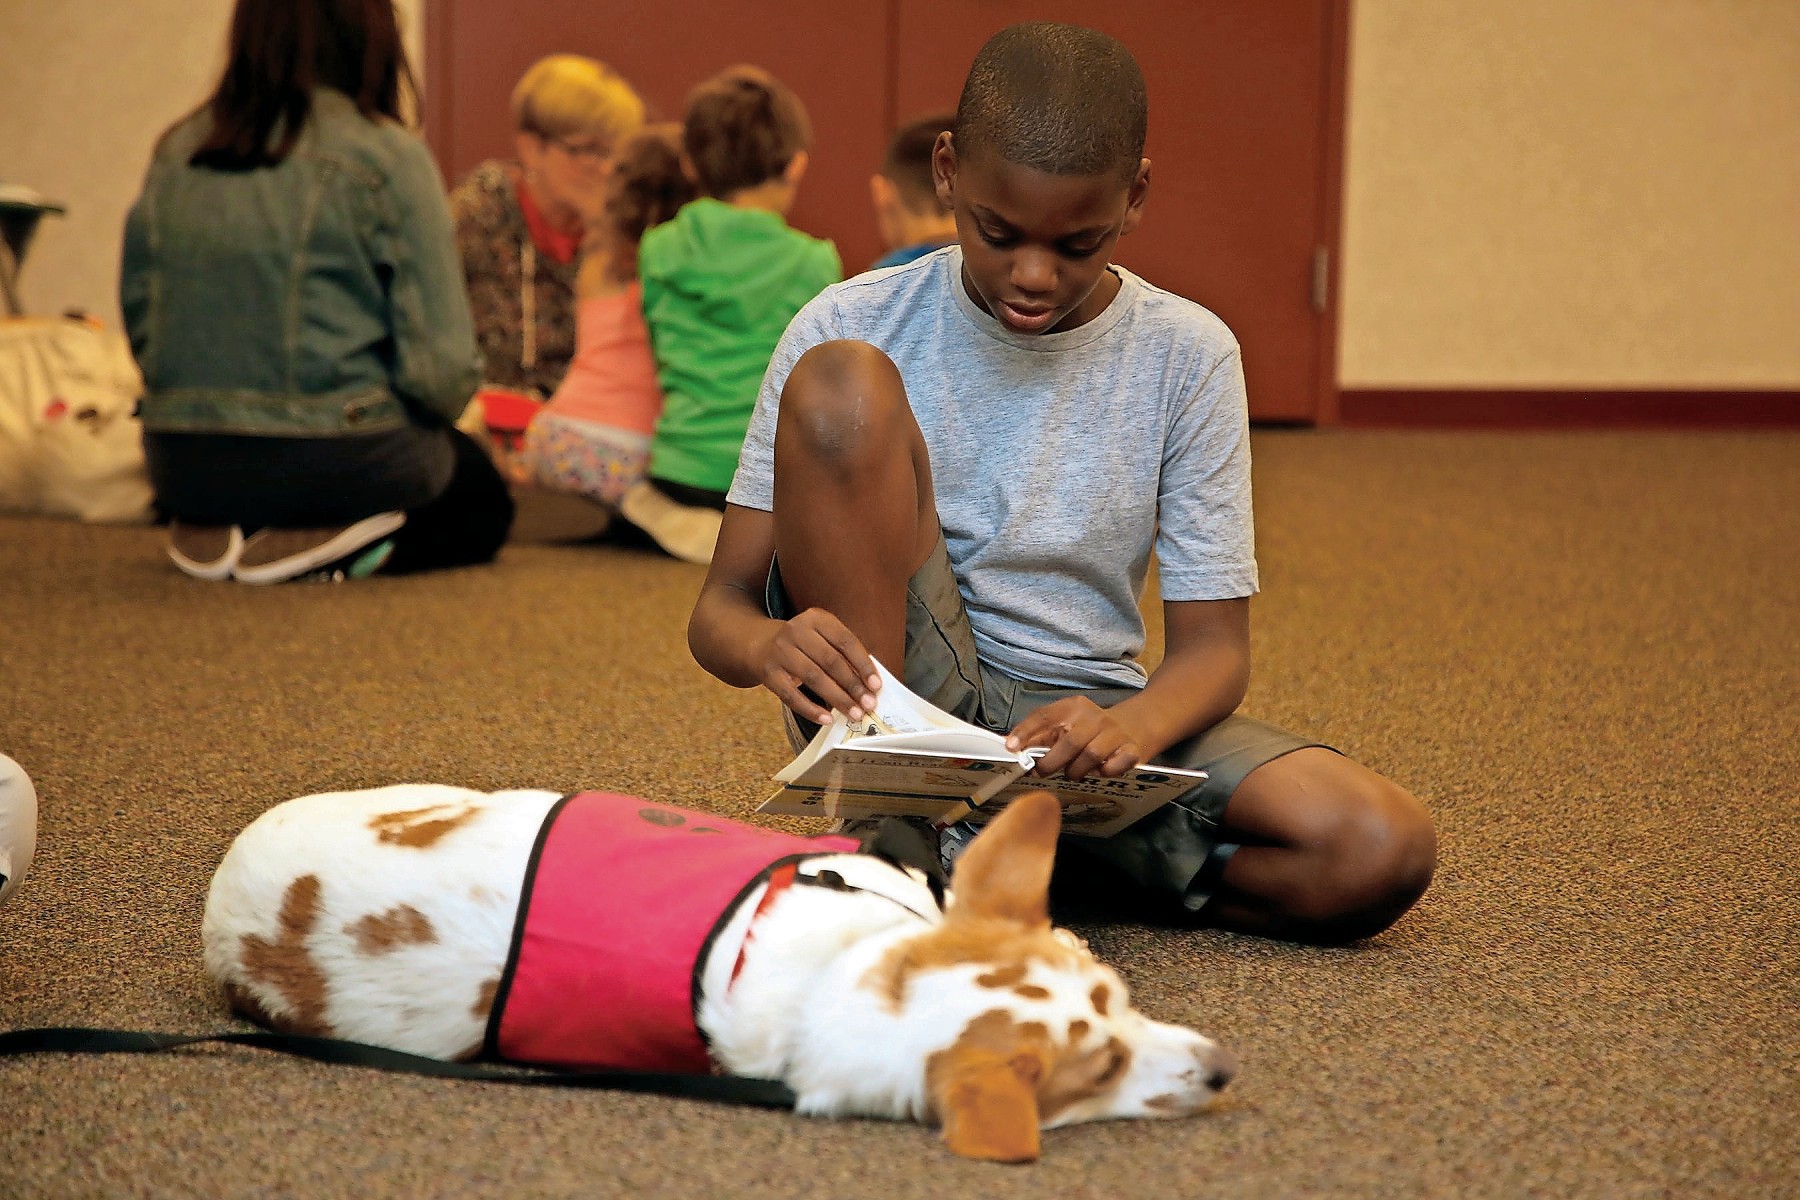 Aaron Stewart, 11, enjoyed a book as his canine friend, Chelsea, listened.